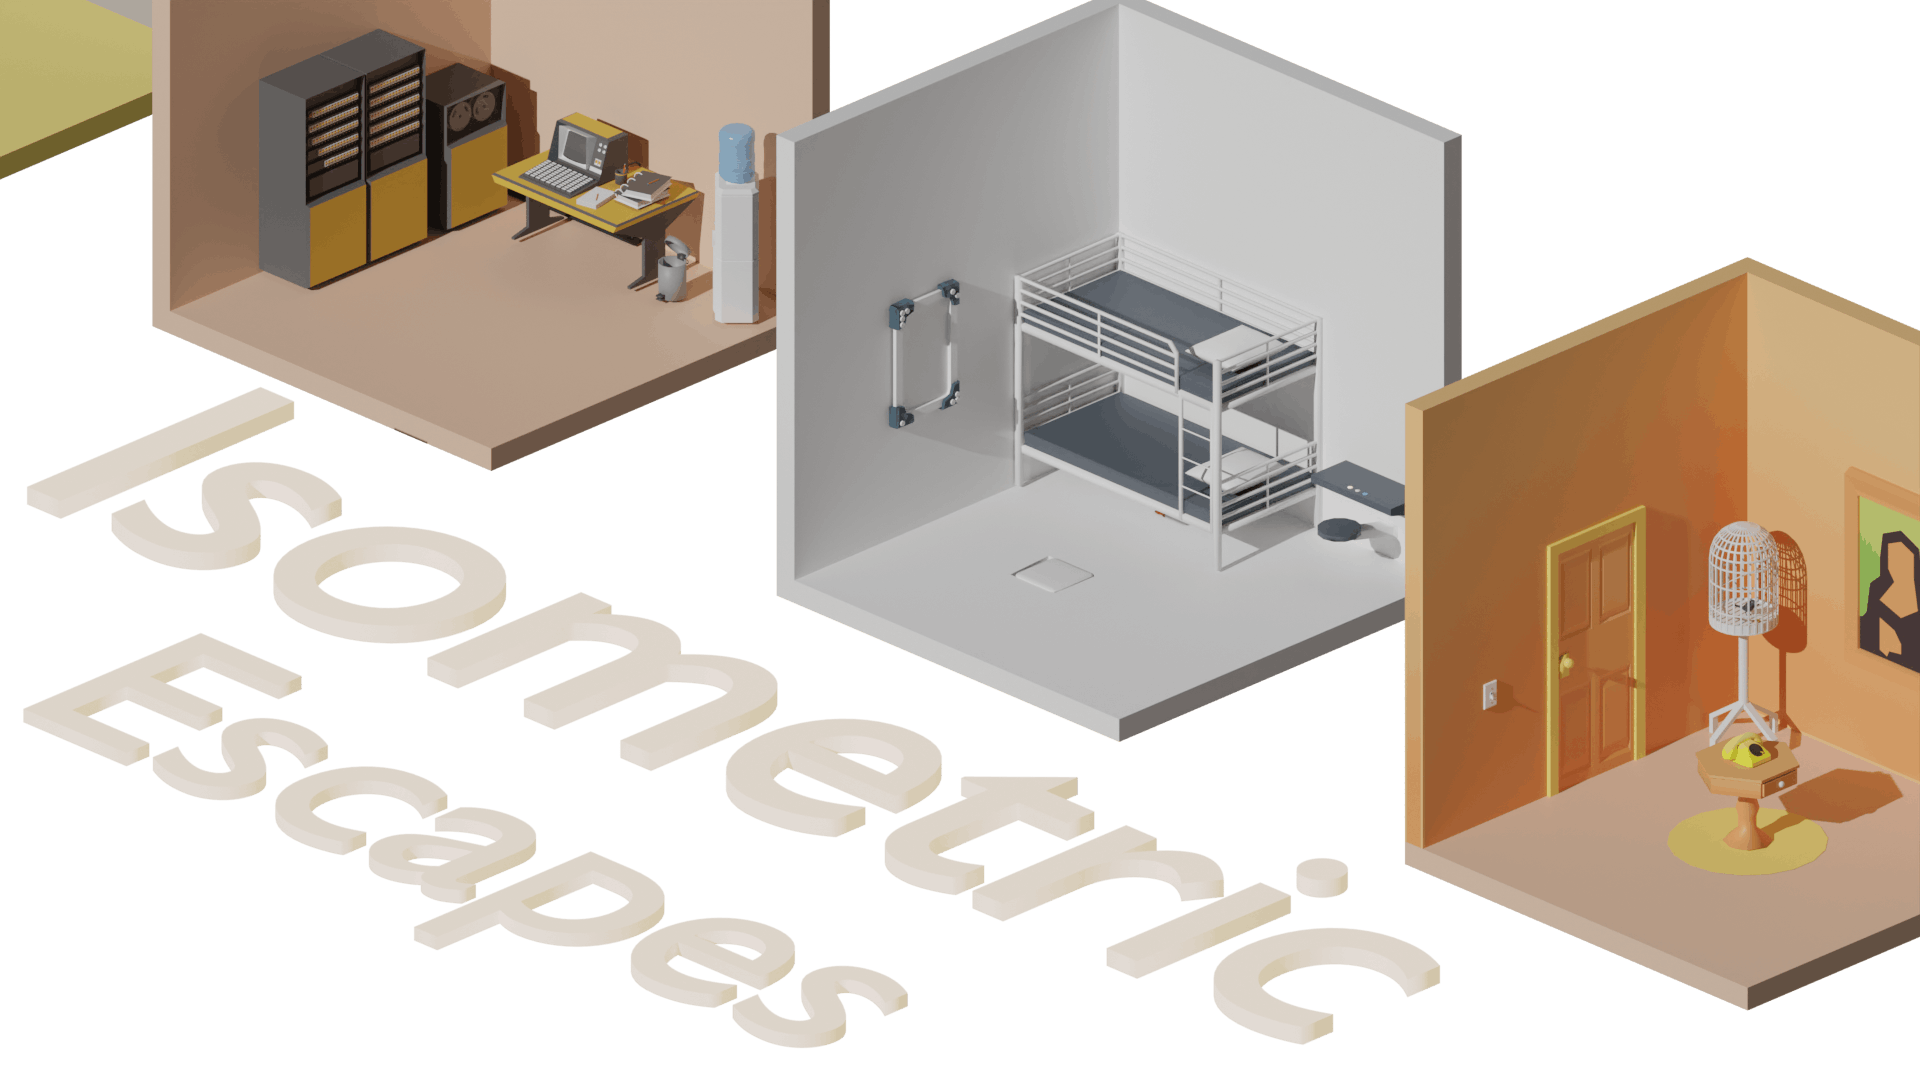 Isometric Escapes